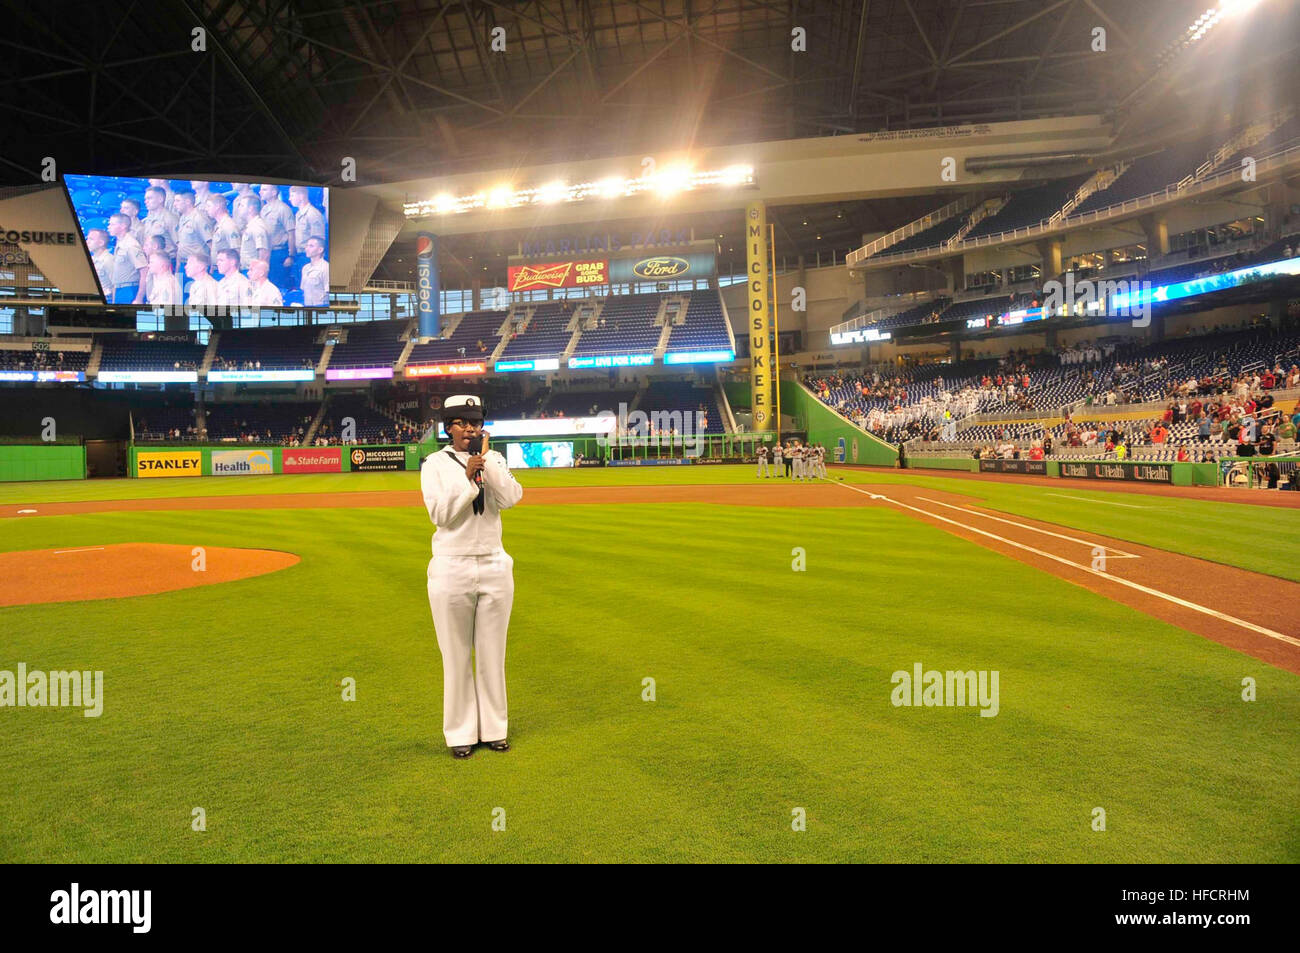 Boatswain's Mate Seaman Marie Roberts from the amphibious transport dock ship USS New York (LPD 21) sings the national anthem during Military Appreciation Night at Marlins Park as part of Fleet Week Port Everglades. This is the 24th annual Fleet Week in Port Everglades, South Florida's annual celebration of the maritime services. (U.S. Navy photo by Mass Communication Specialist 2nd Class Cyrus Roson/Released) Port Everglades Fleet Week 2014 140430-N-YO707-404 Stock Photo